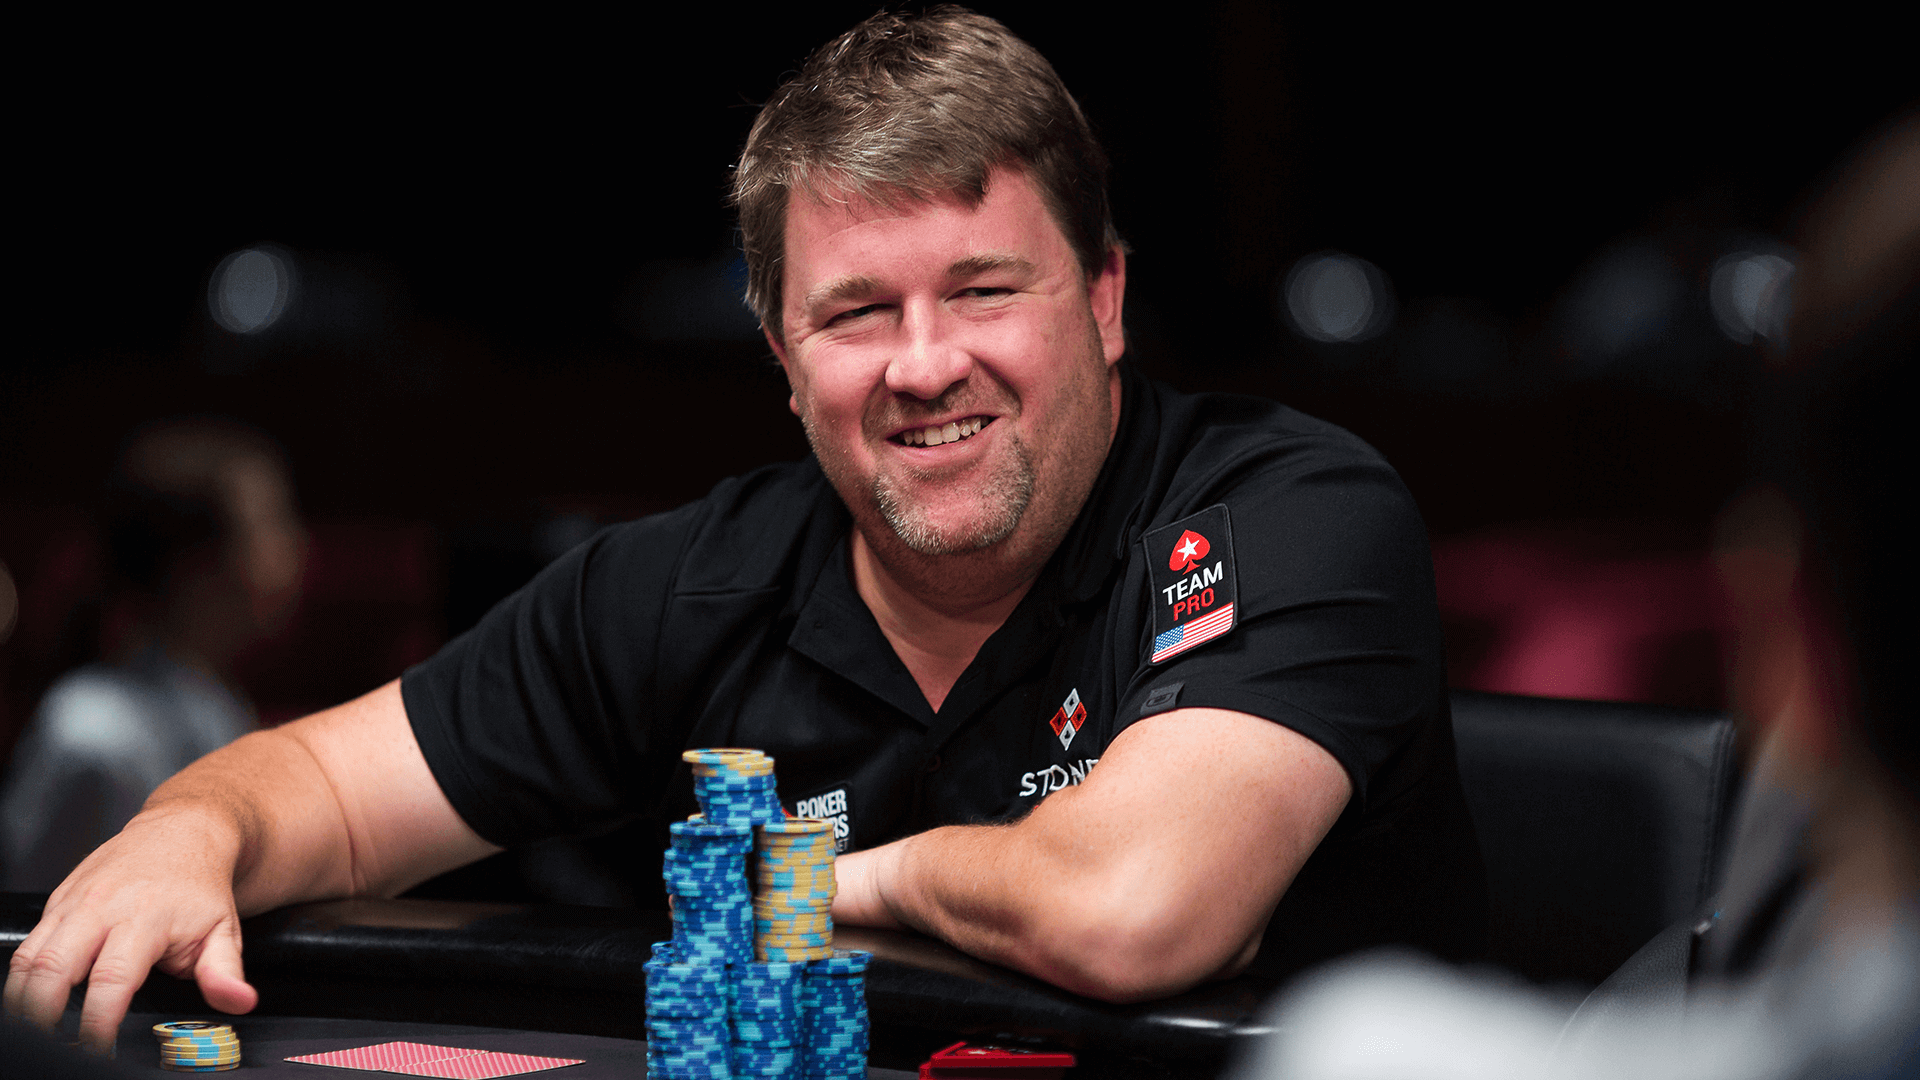 Chris Moneymaker promises Hell is coming for PayPal despite getting refund